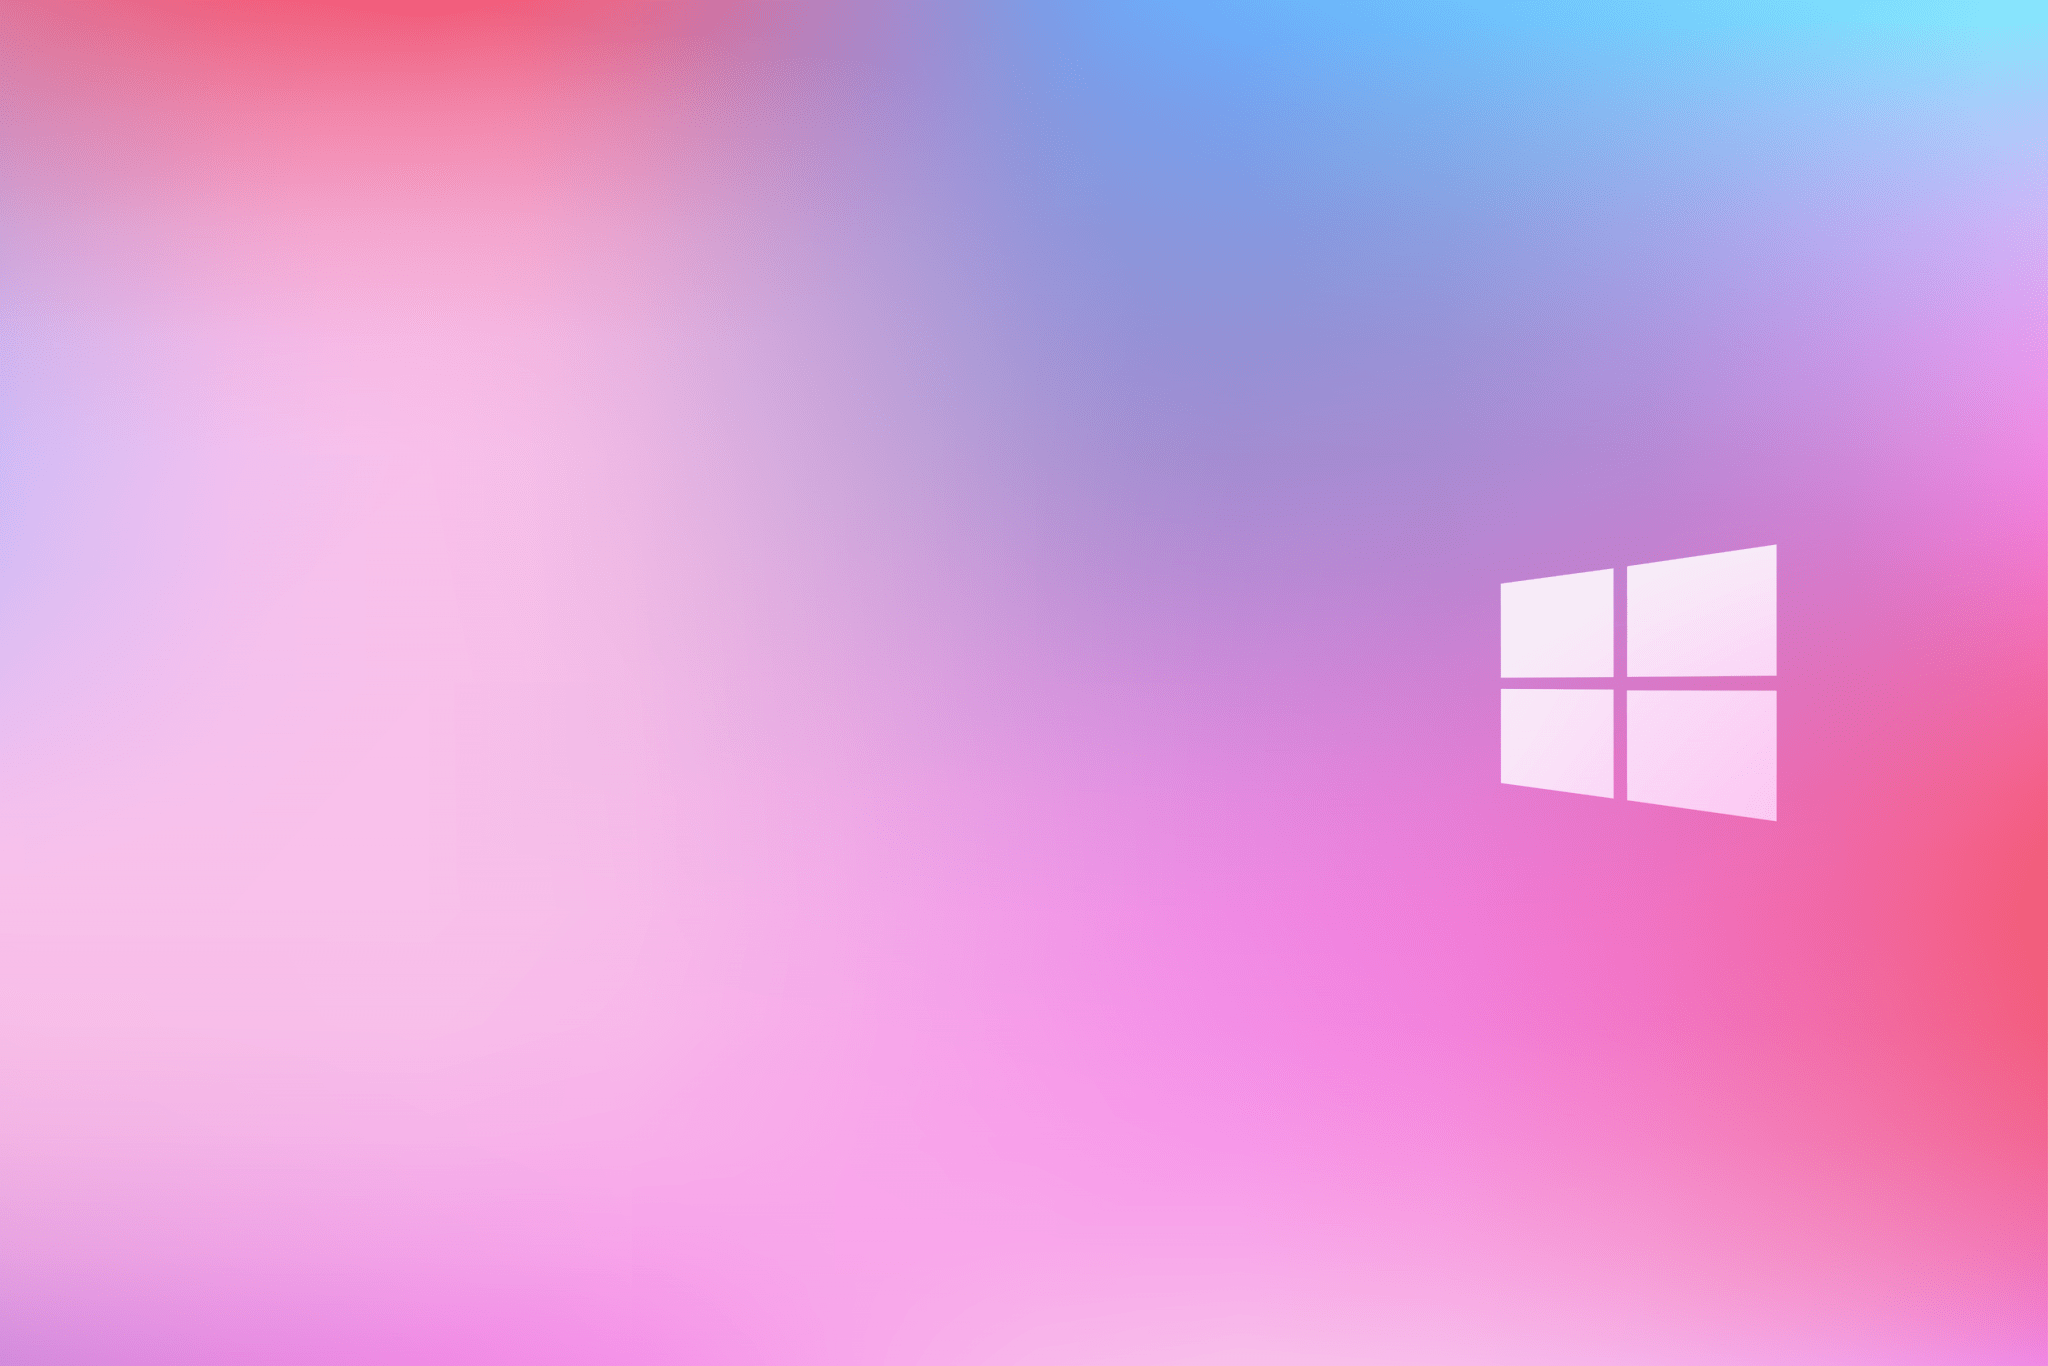 Windows 10 wallpaper with a colorful background - Windows 11